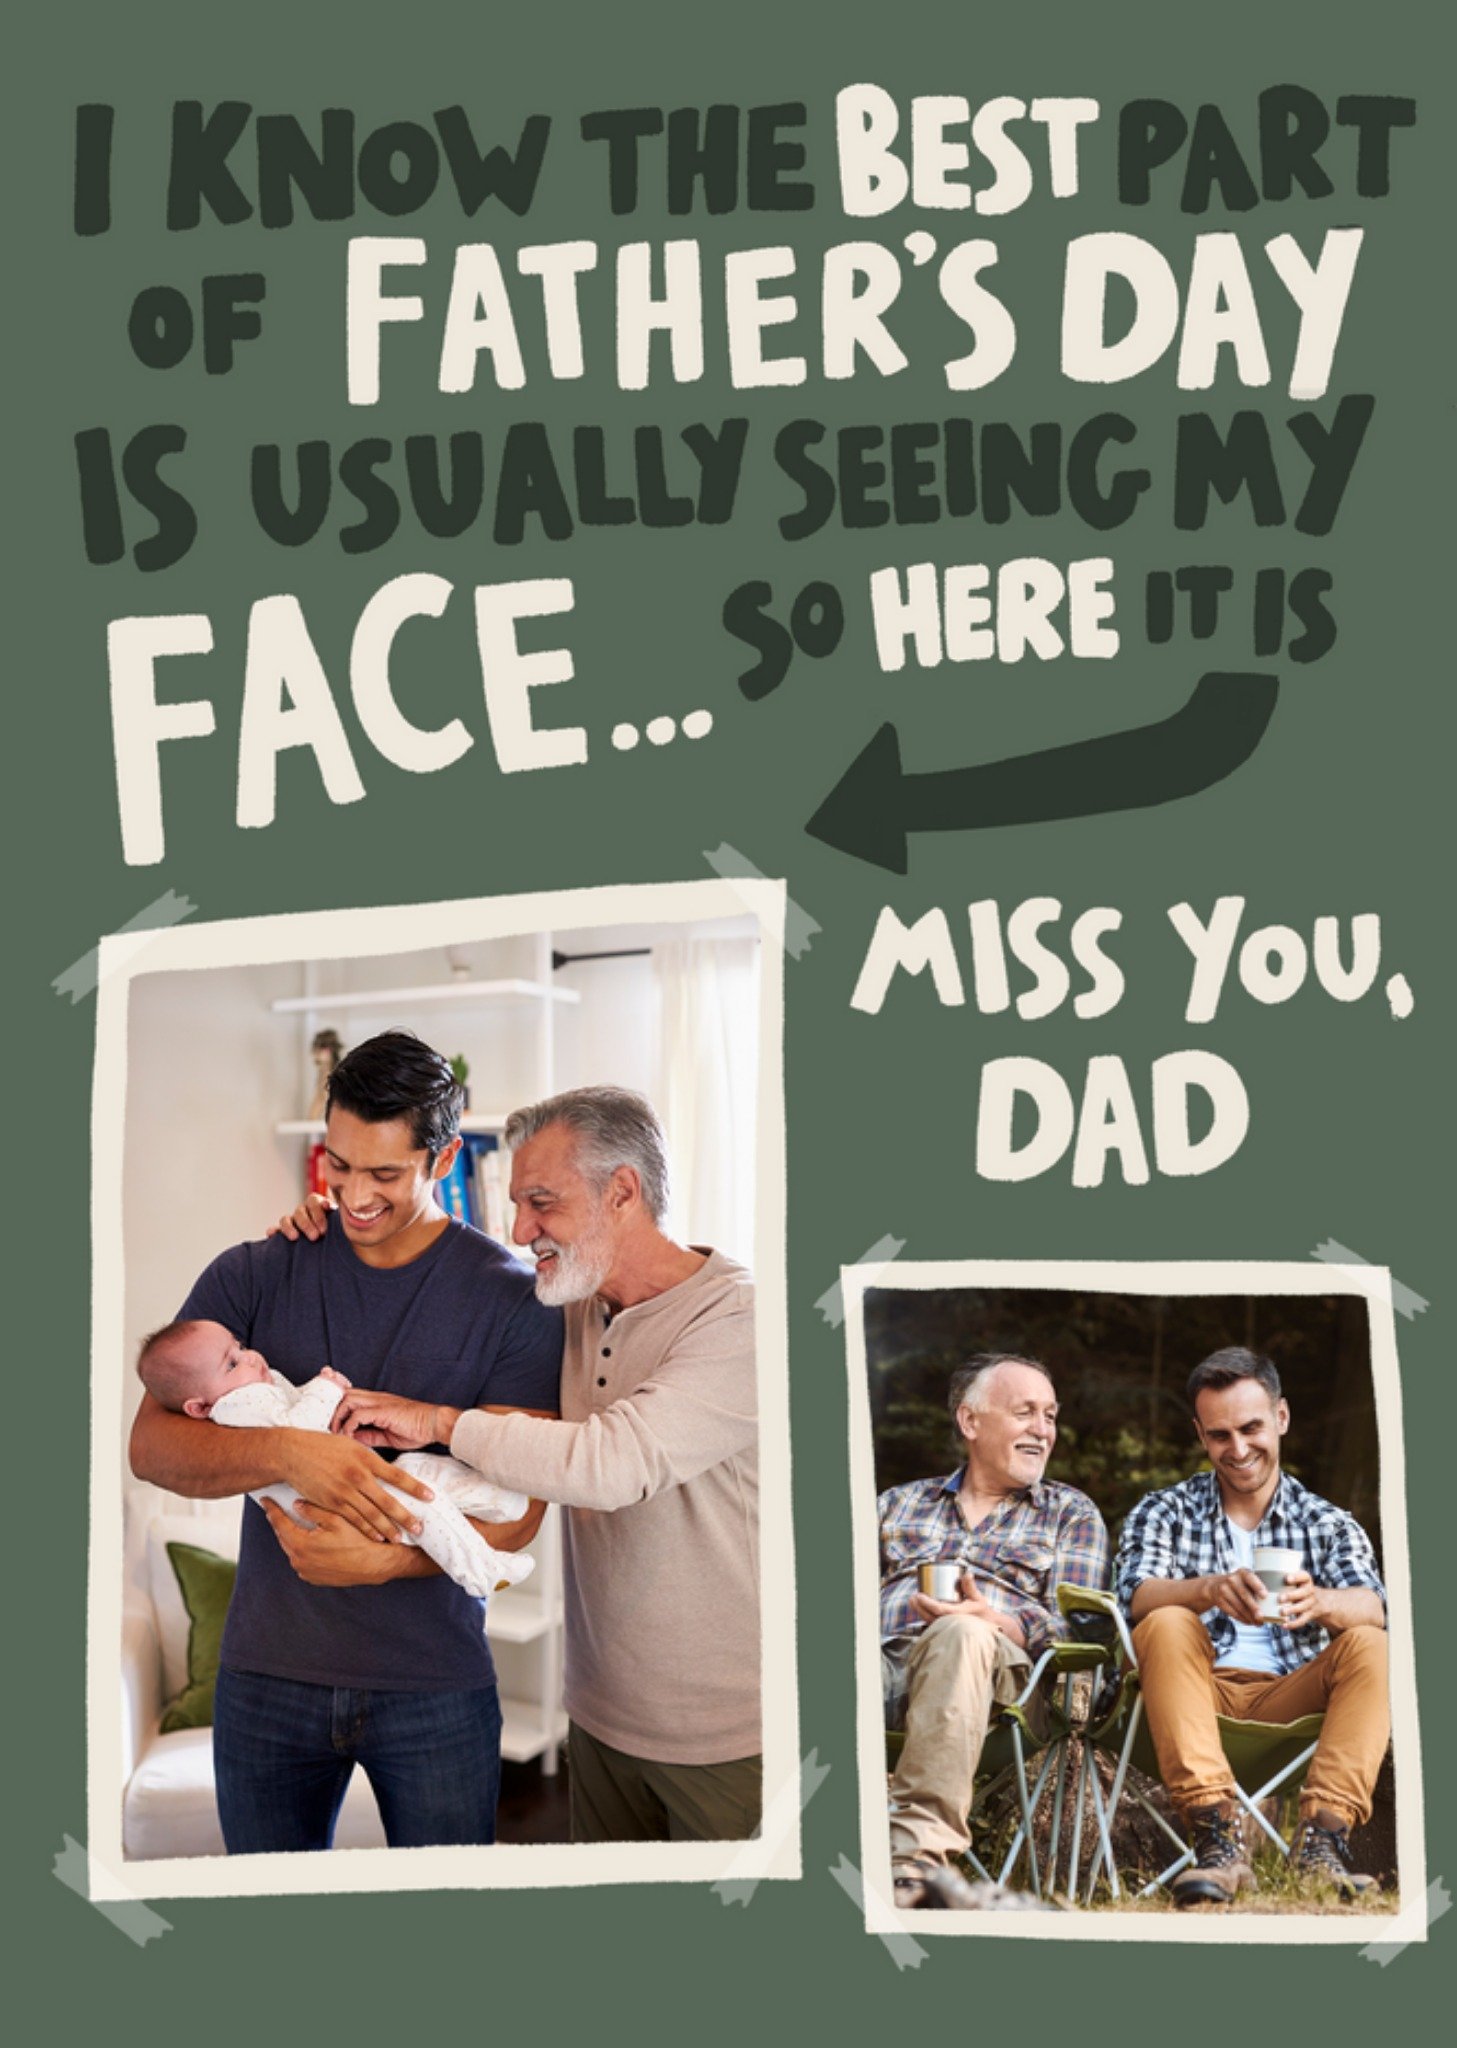 Moonpig I Know The Best Part Of Fathers Day Is Usally Seeing My Face Card Ecard